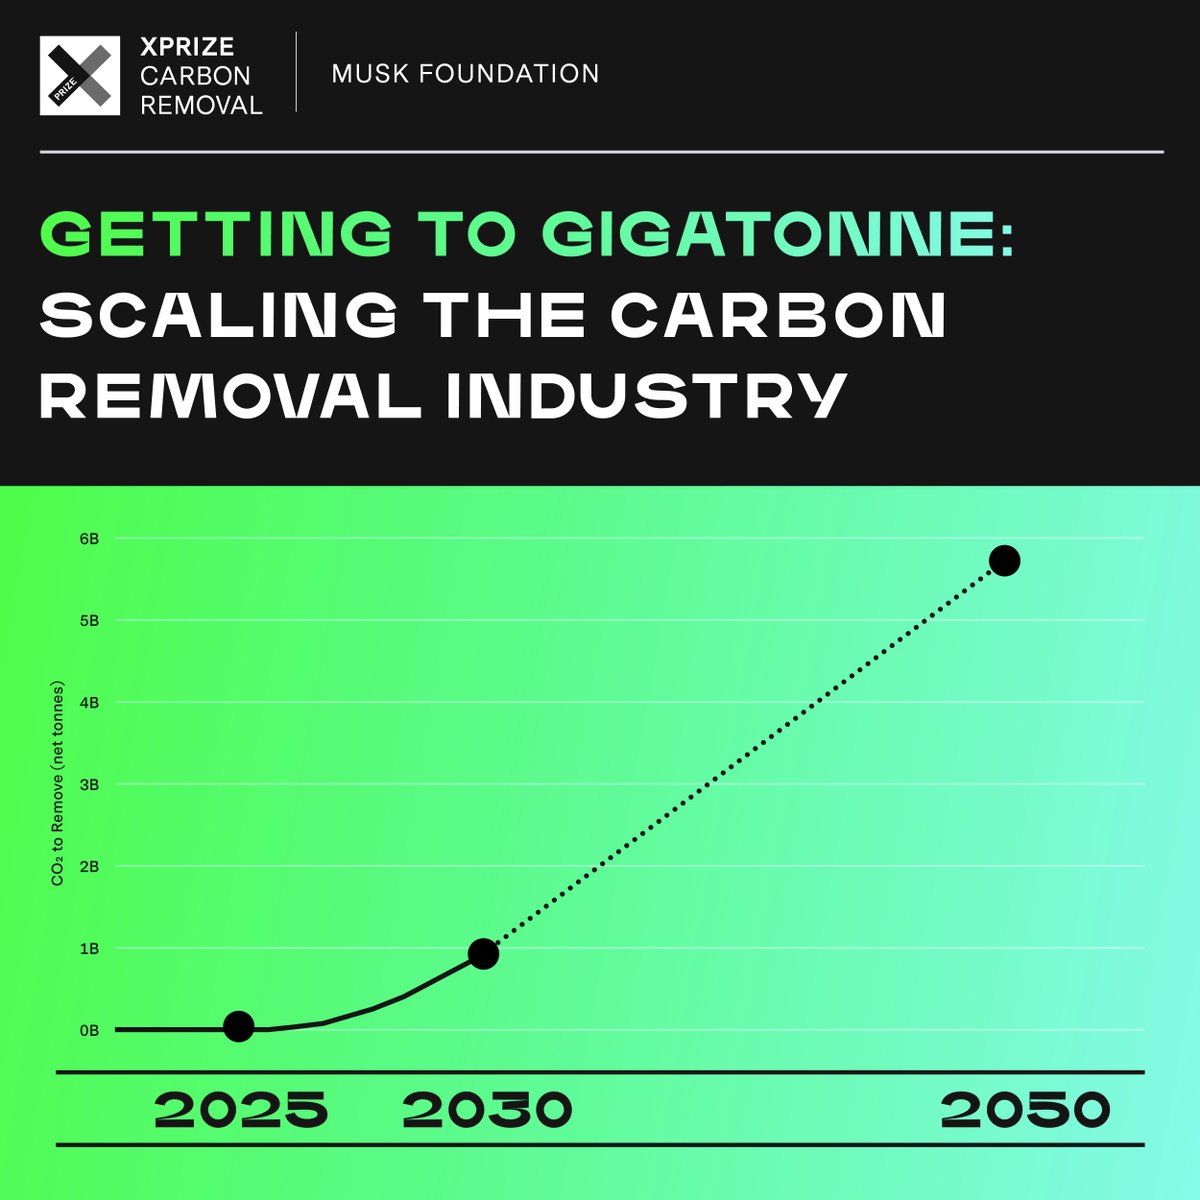 First stop: Kilotonne-scale ✅
Next stop? Megatonne-scale 
The goal: Gigatonne-scale carbon removal 

Learn more about how #XPRIZECarbonRemoval teams are planning to scale their solutions to megatonne-scale by 2030 in our #GettingToGigatonne Report here. xprize.org/prizes/carbonr…